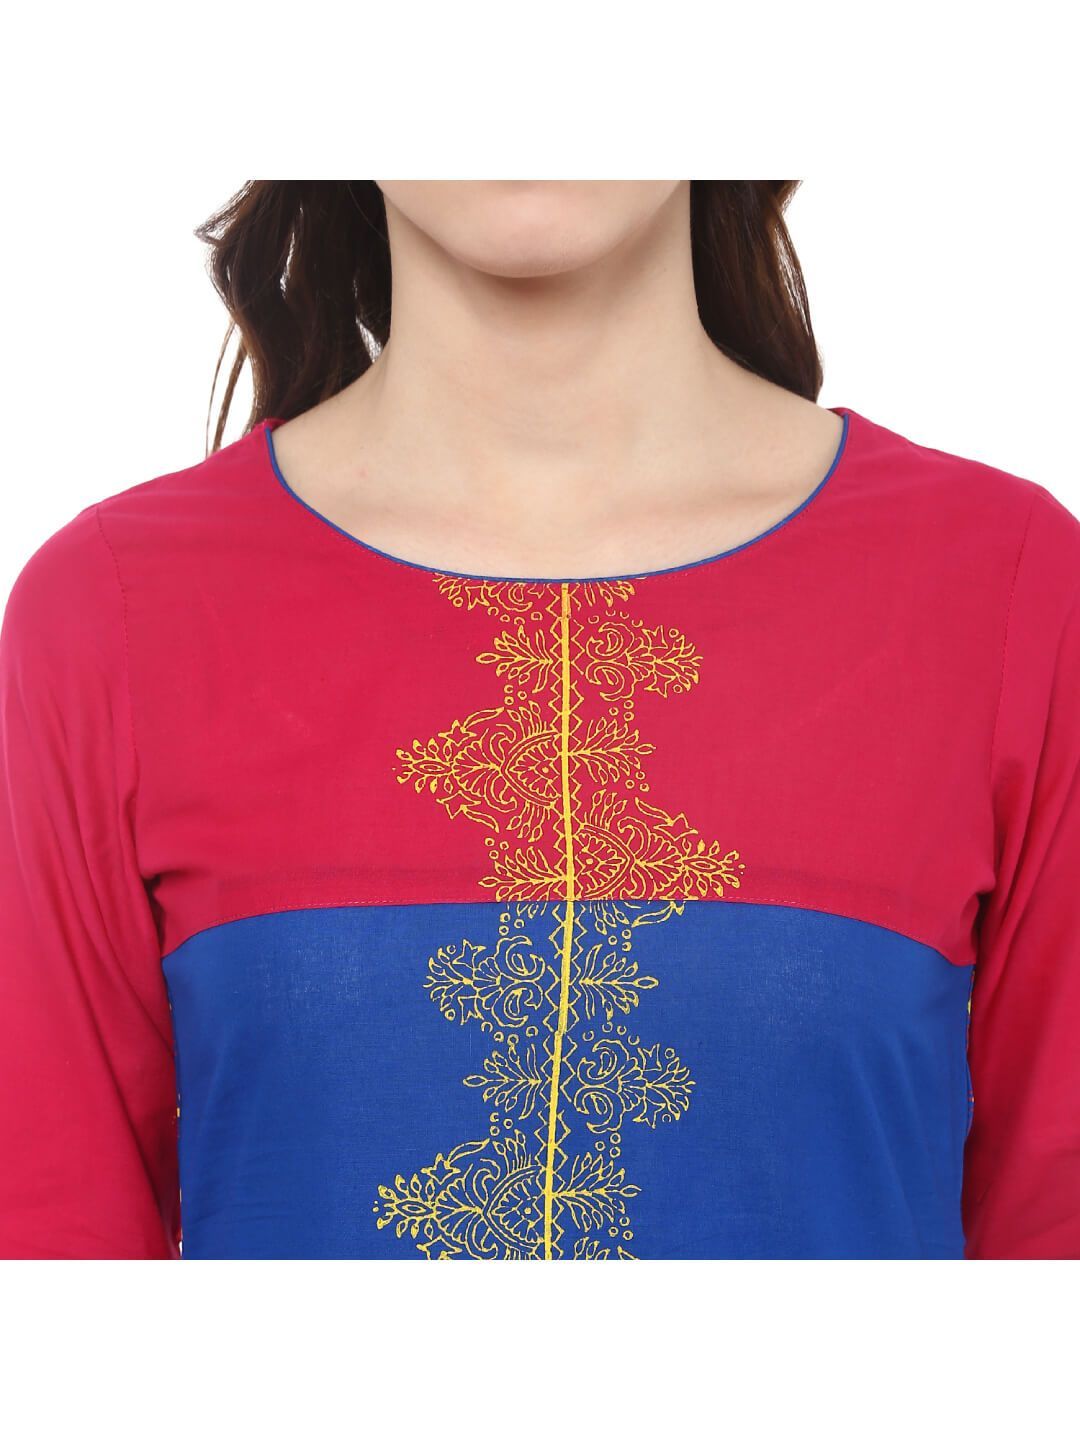 Women's Navy Blue And Red Color Ajrakh Hand Block Cotton Printed Straight Kurta - Wahe-Noor